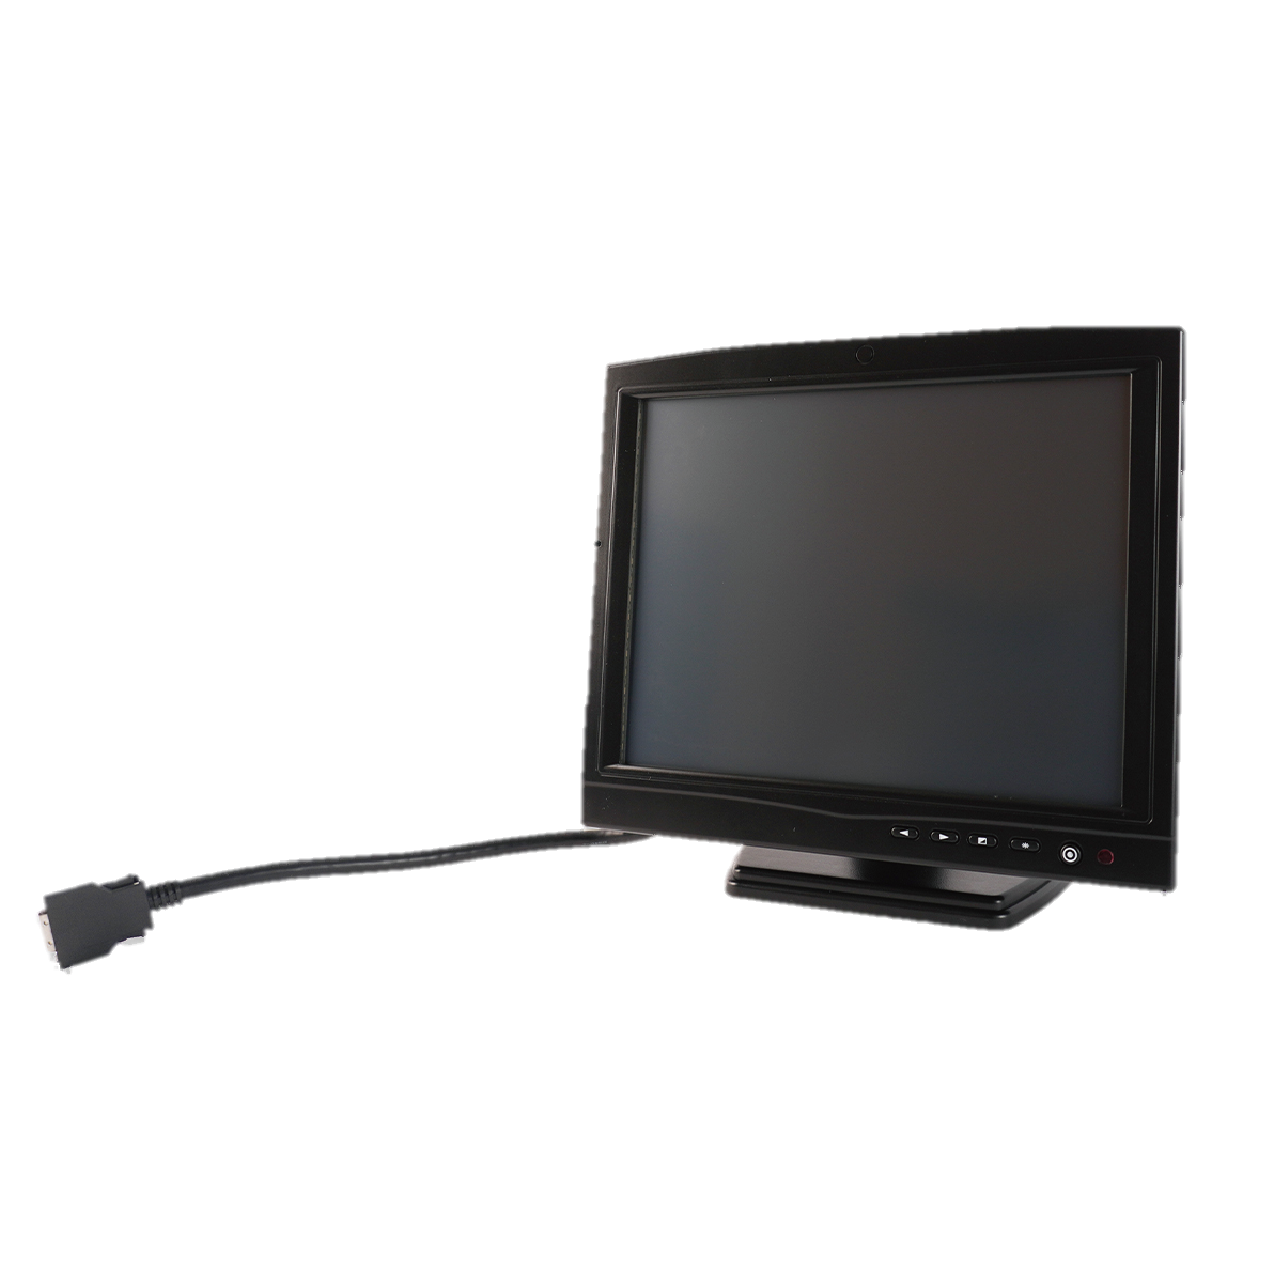 SEF104C-LUH is an industrial touch monitor which can be used to any kinds of vehicles.